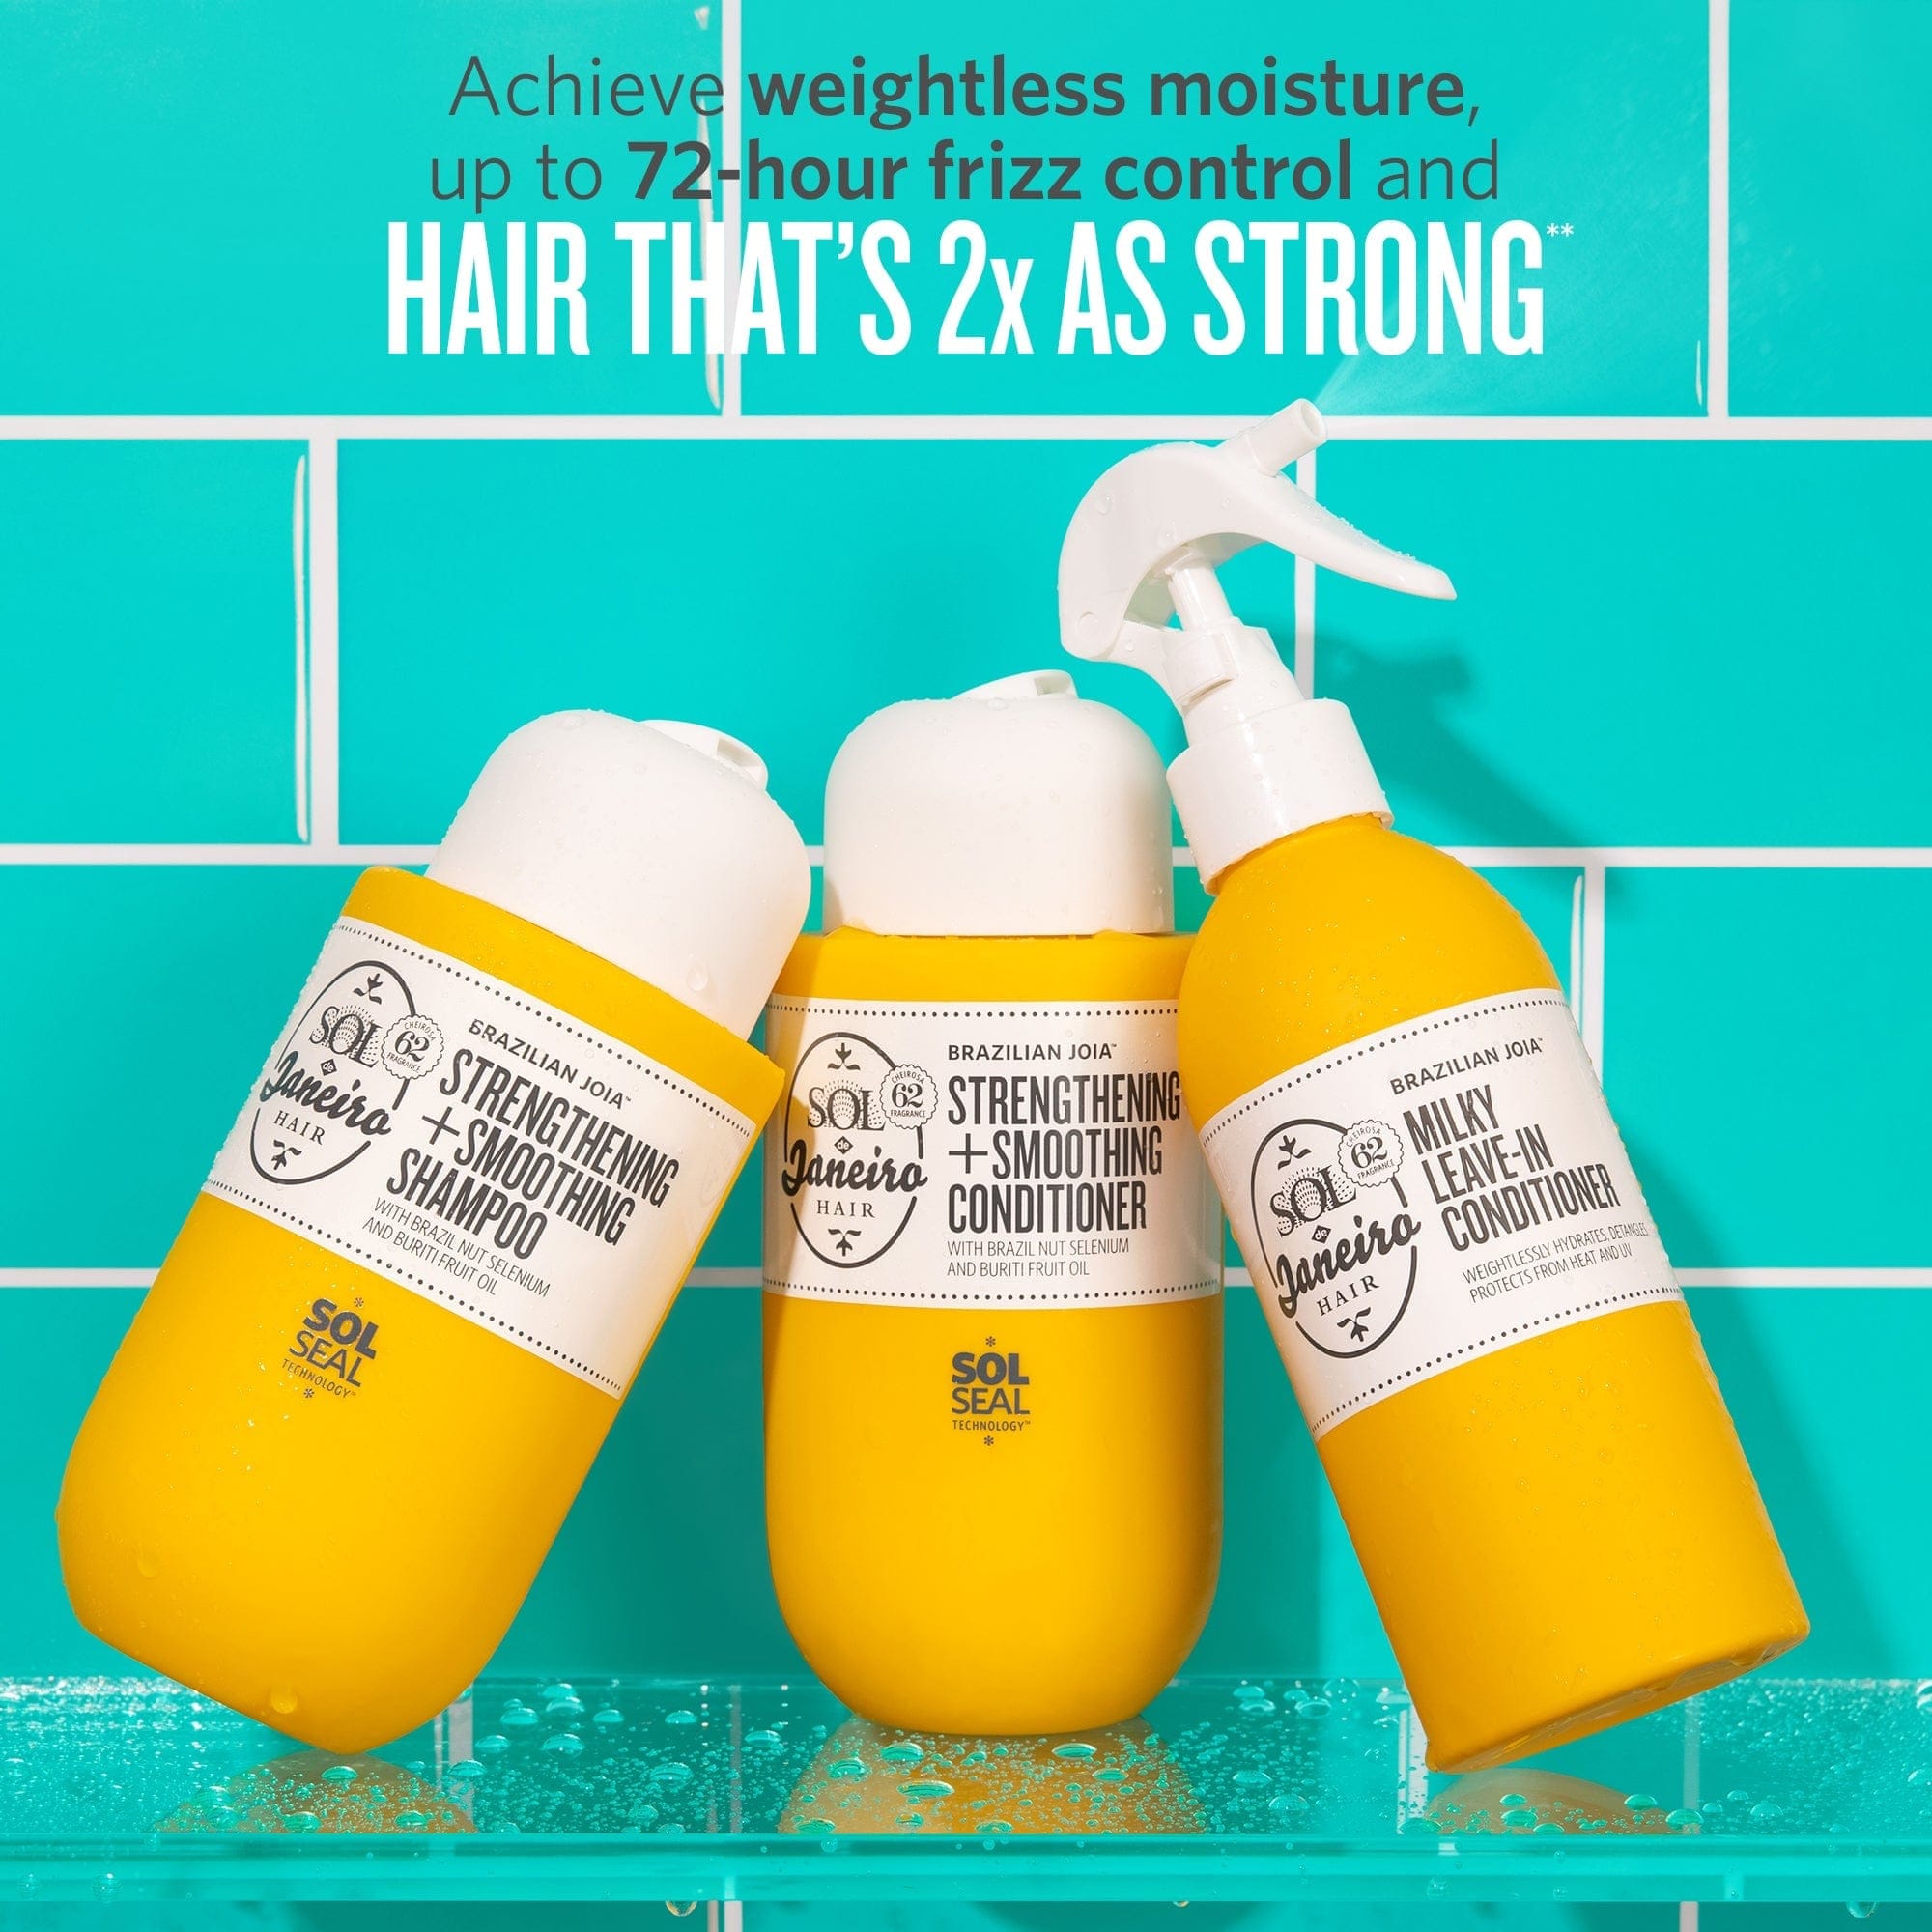 Archieve weightless moisture, up to 72-hours frizz control and hair that&